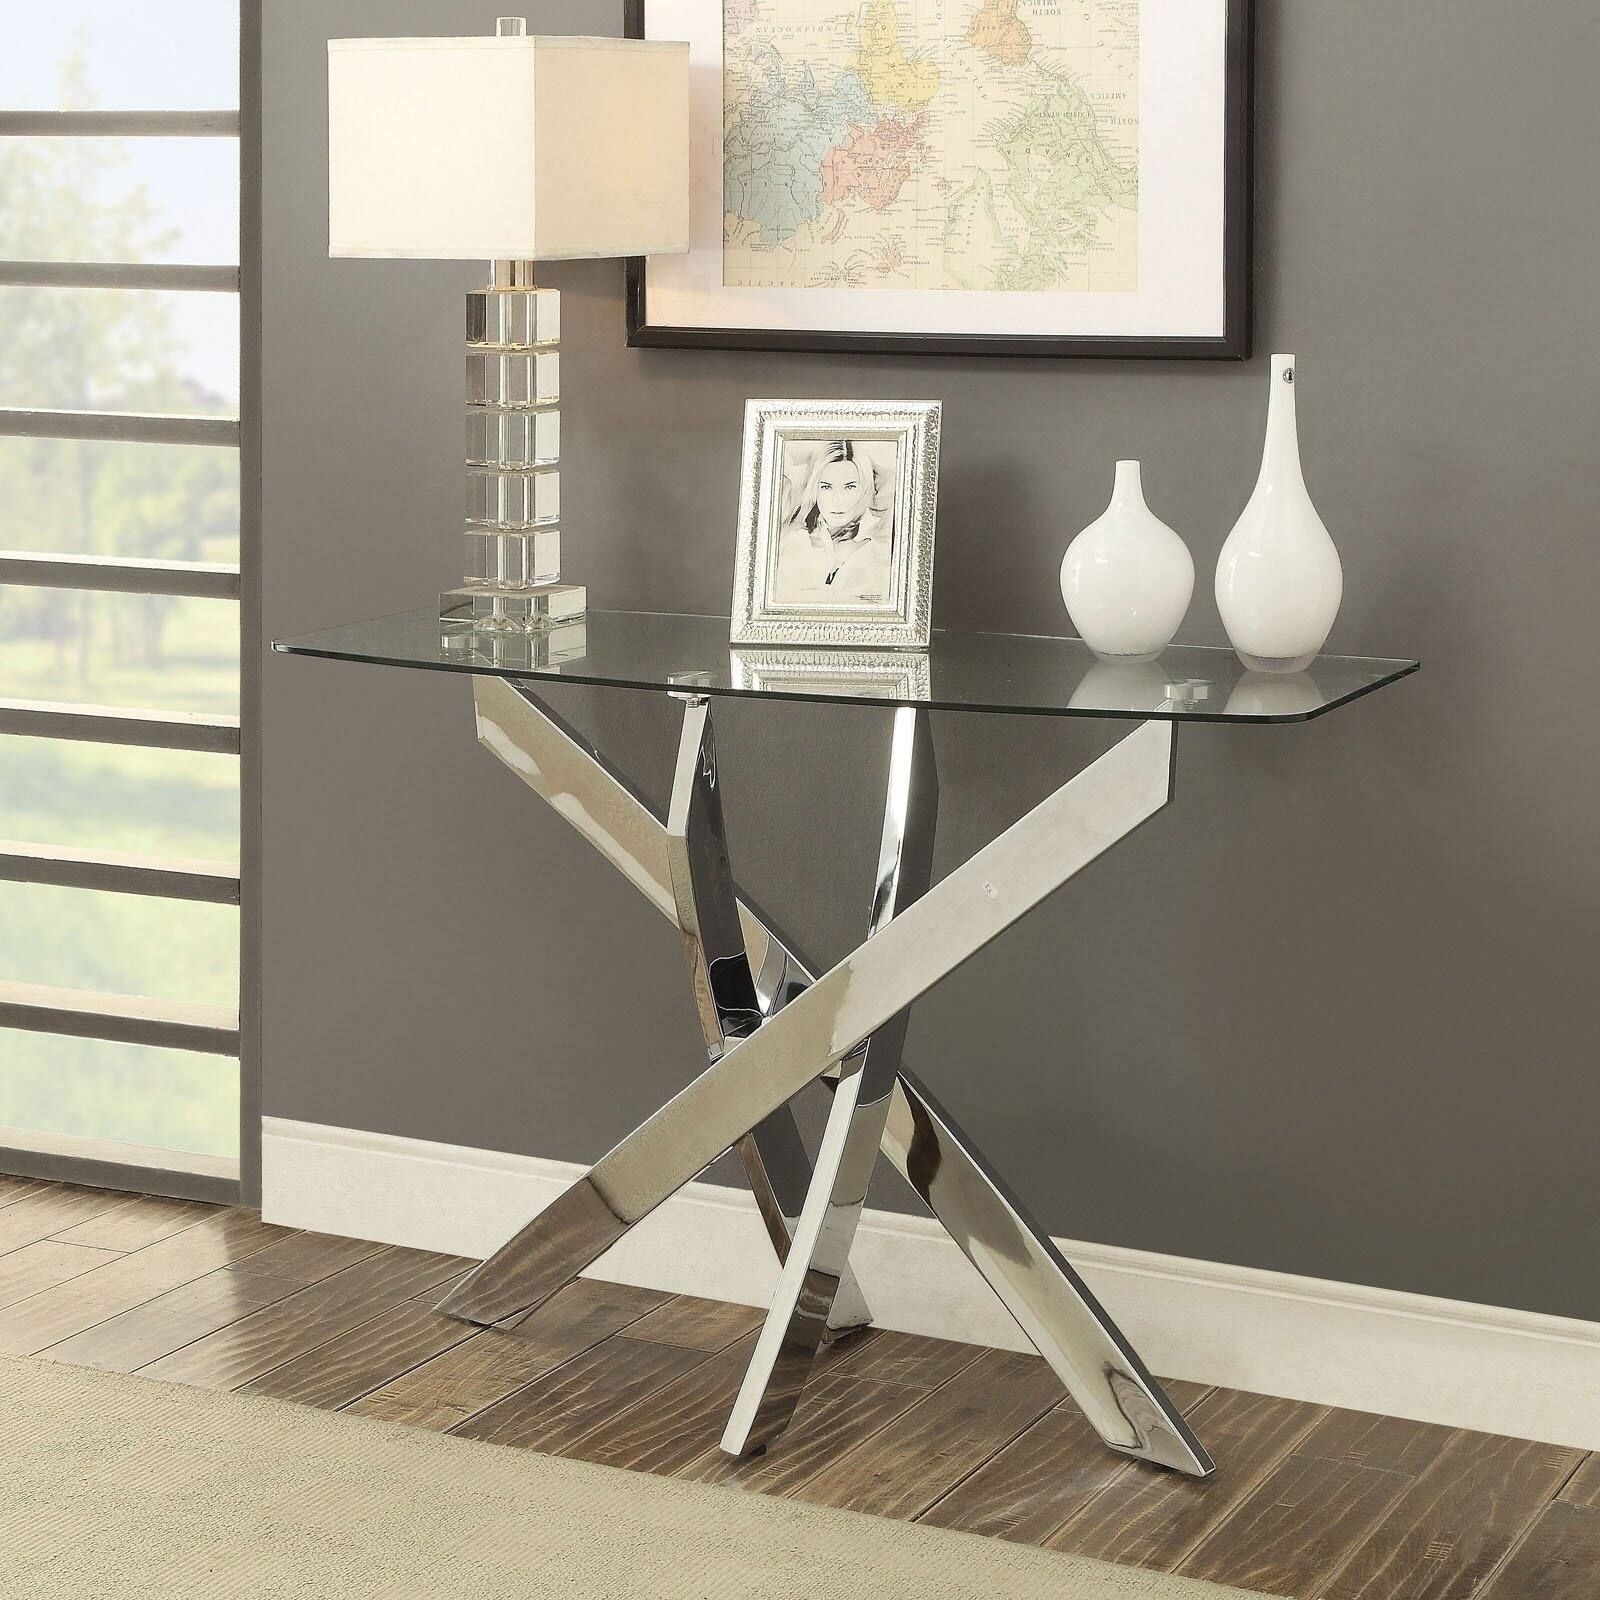 Furniture Of America Myron Contemporary Style Chrome Base Sofa Table Pertaining To Chrome And Glass Modern Console Tables (View 2 of 20)